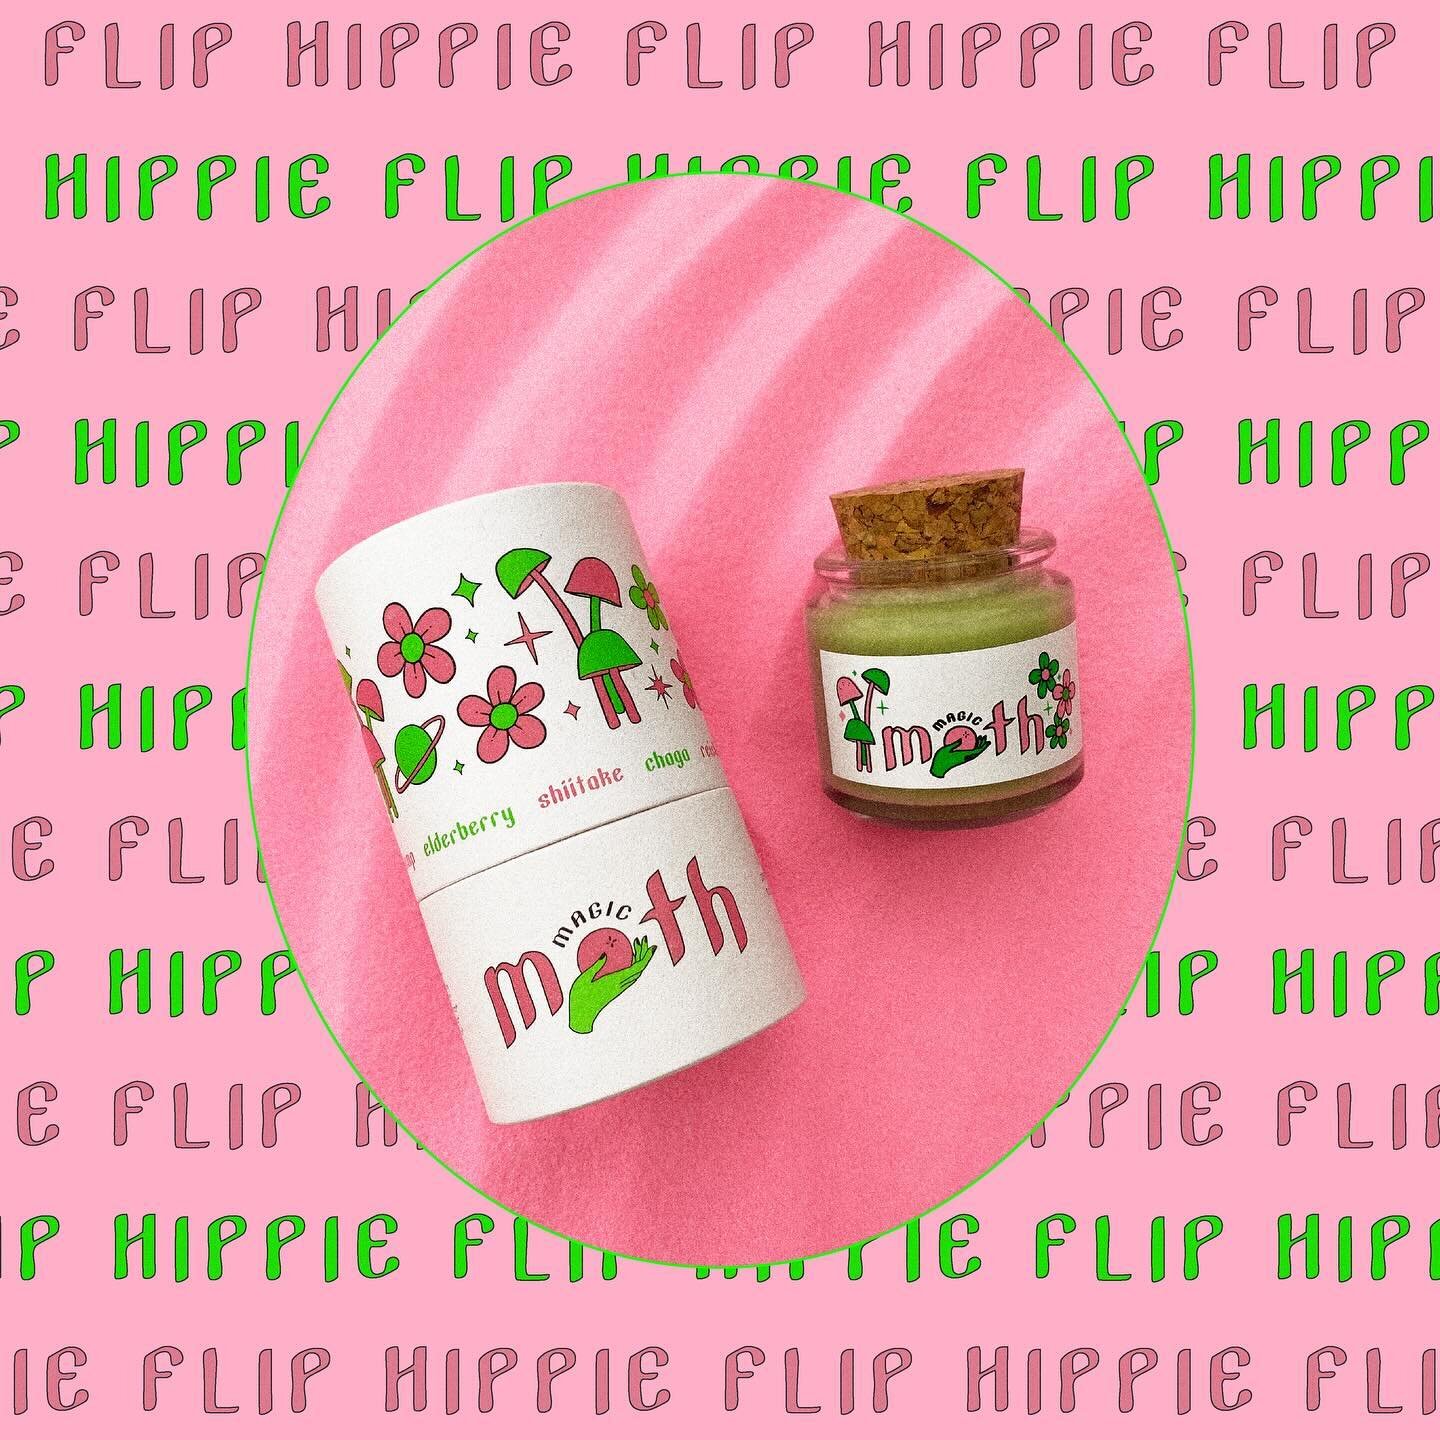 HIPPIE FLIP hemp shroom berry face balm

Expect a trippy soft, supple and balanced complexion with reduced redness and evened tone.

Packed with anti-inflammatory powerhouses, this nutrient rich balm calms, soothes, and invigorates healthy circulatio